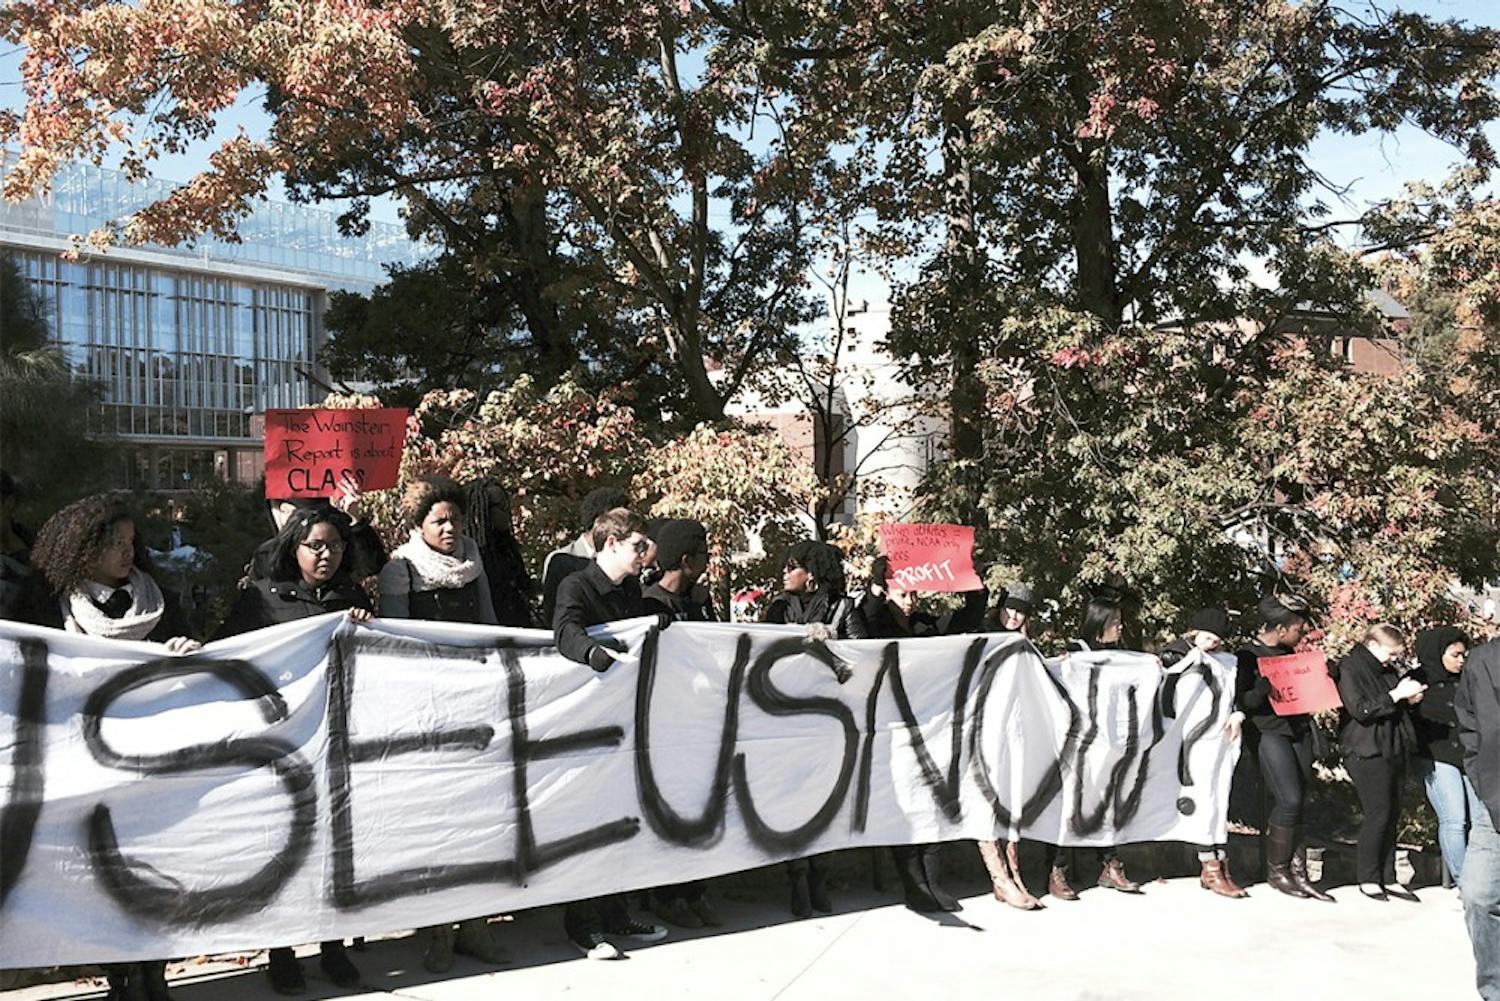 The Real Silent Sam Coalition ended its CanYouSeeUsNow march outside of Kenan Stadium during UNC’s Homecoming game.